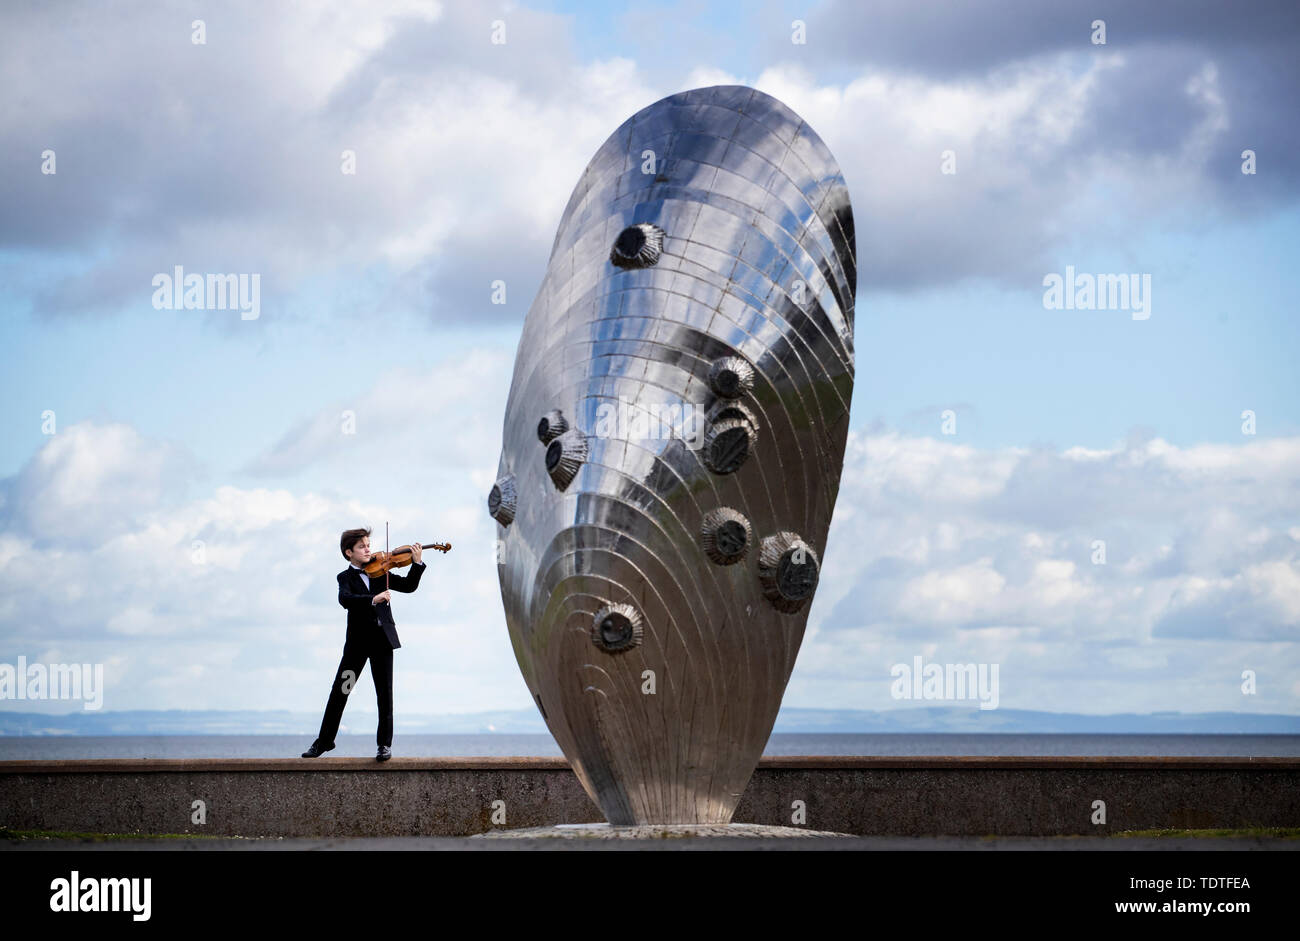 Viktor Seifert, 12, from St Mary's Music School in Edinburgh, plays the Orca Driftwood Viola alongside the giant mussel shell sculpture at Musselburgh, East Lothian, ahead of his performance at the Royal Academy of Music in London on July 18th 2019, in the 'Dance For The Sea' event which supports the work of the Marine Conservation Society. Stock Photo